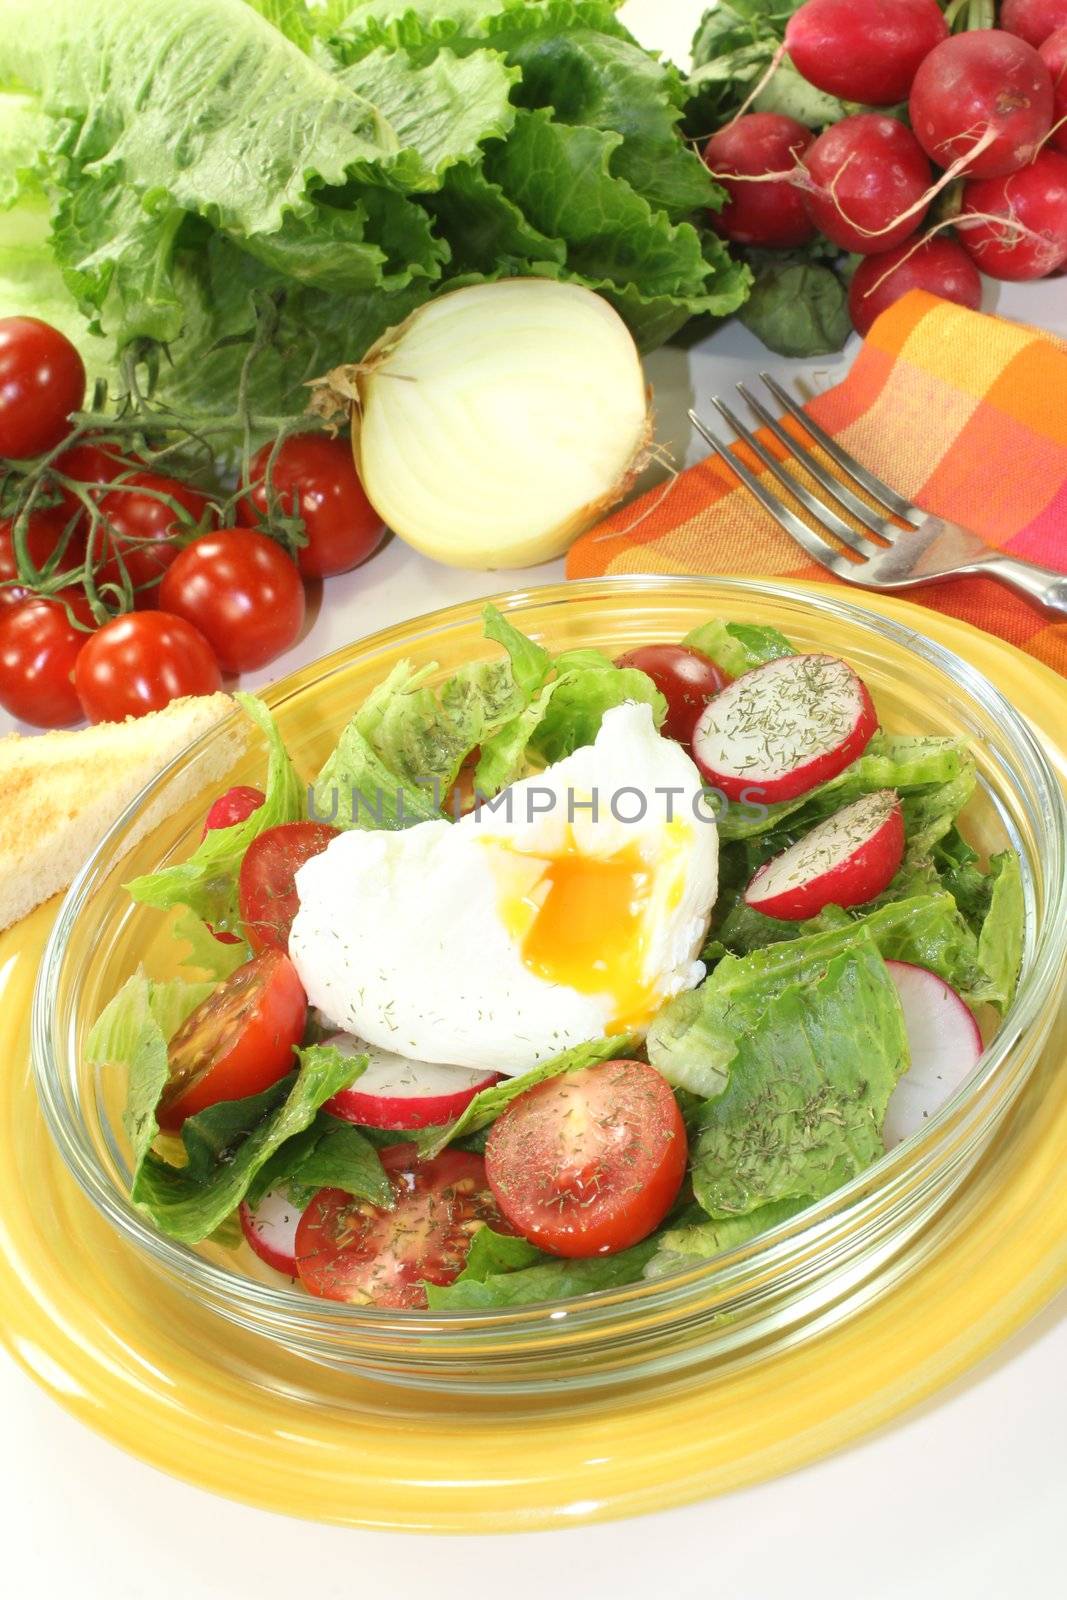 Salad with poached egg, cherry tomatoes, radishes and lettuce